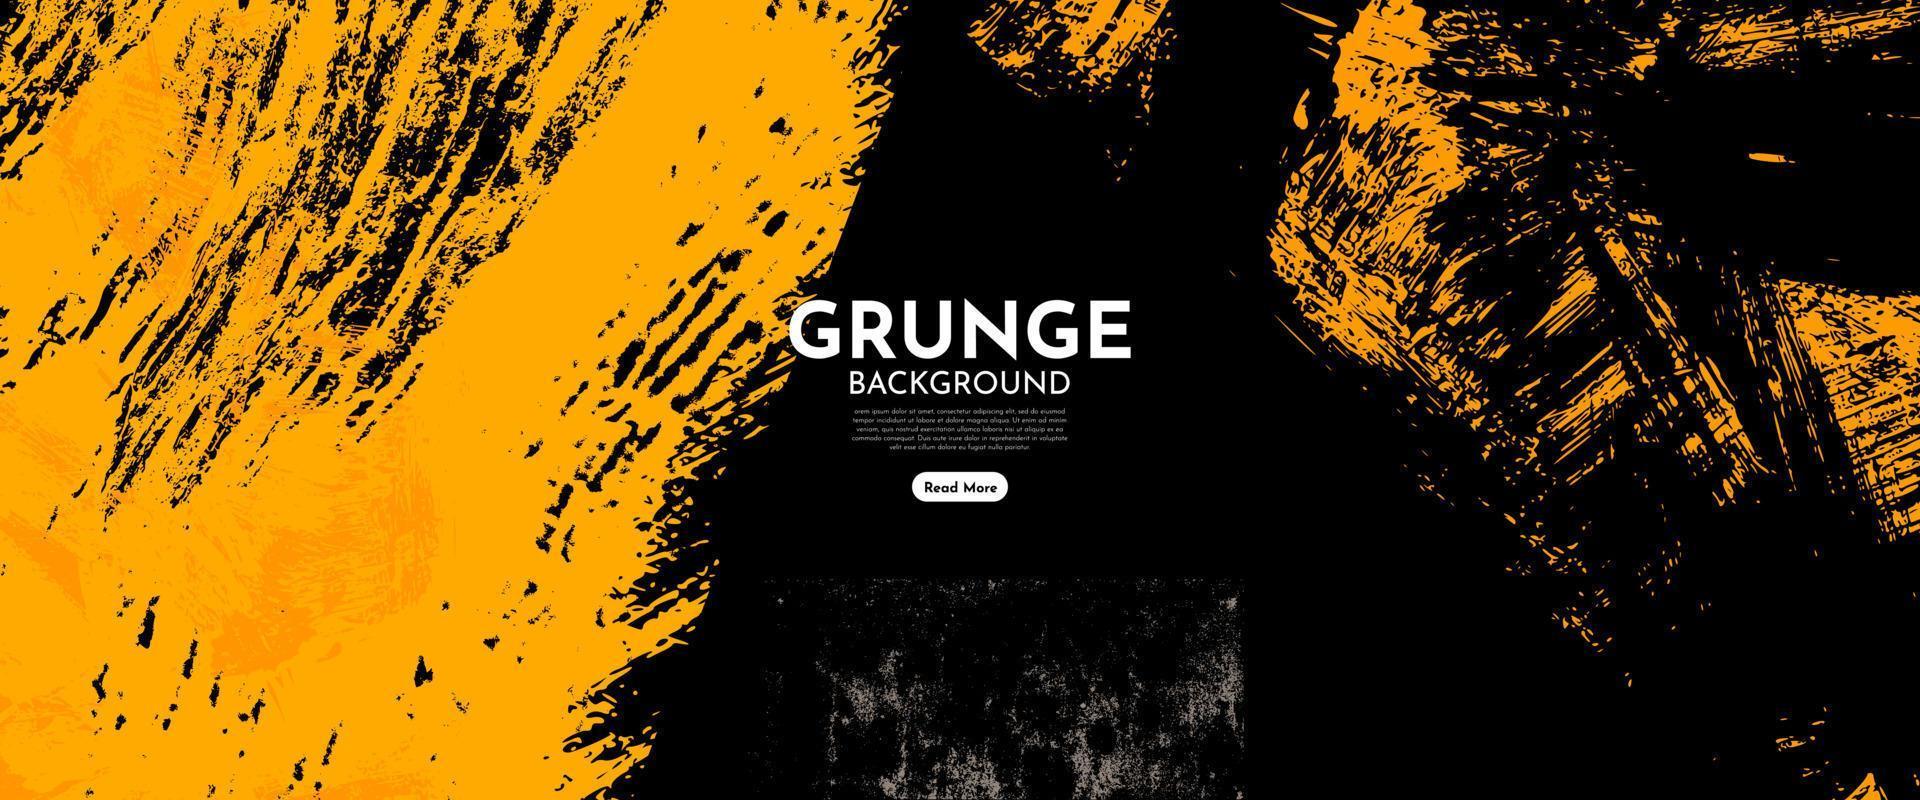 black and yellow abstract dirty grunge background vector